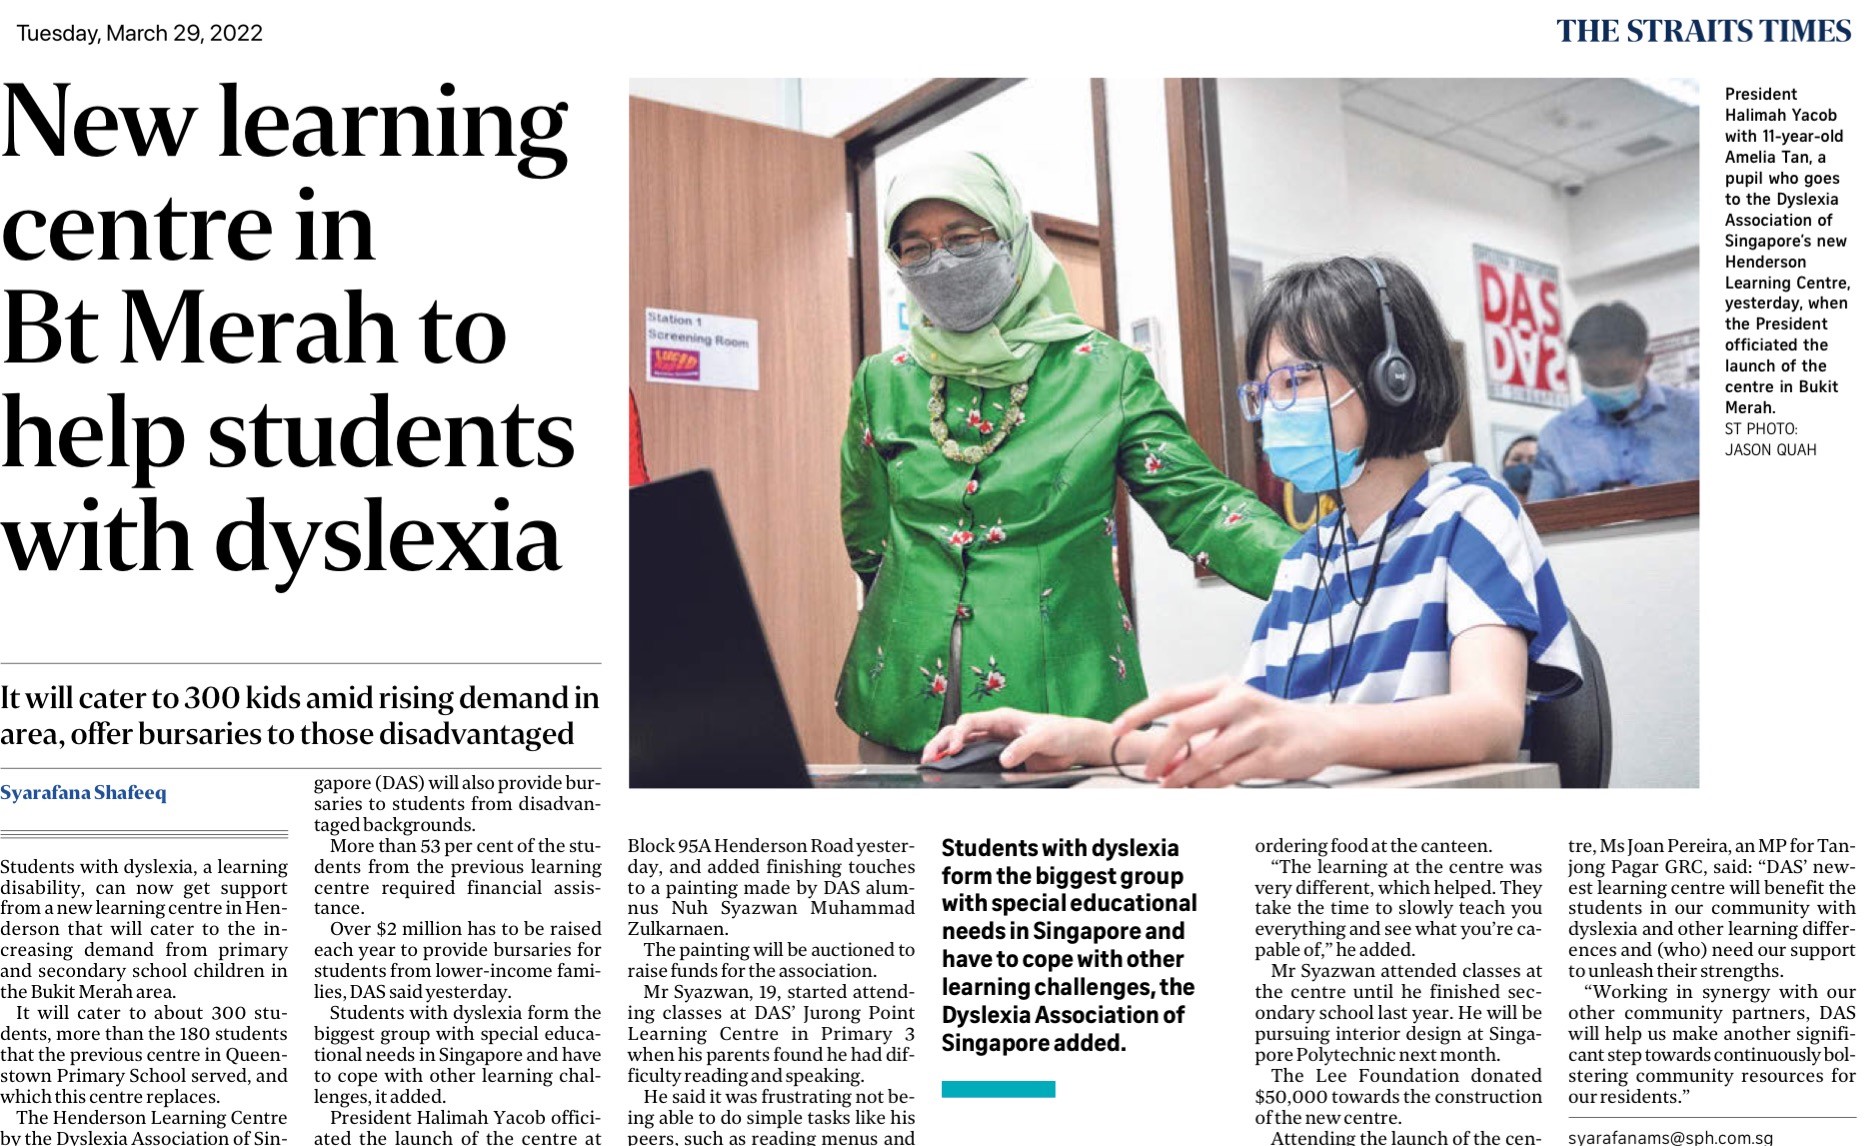 New learning centre in Bukit Merah to help students with dyslexia - ST, 29 March 2022